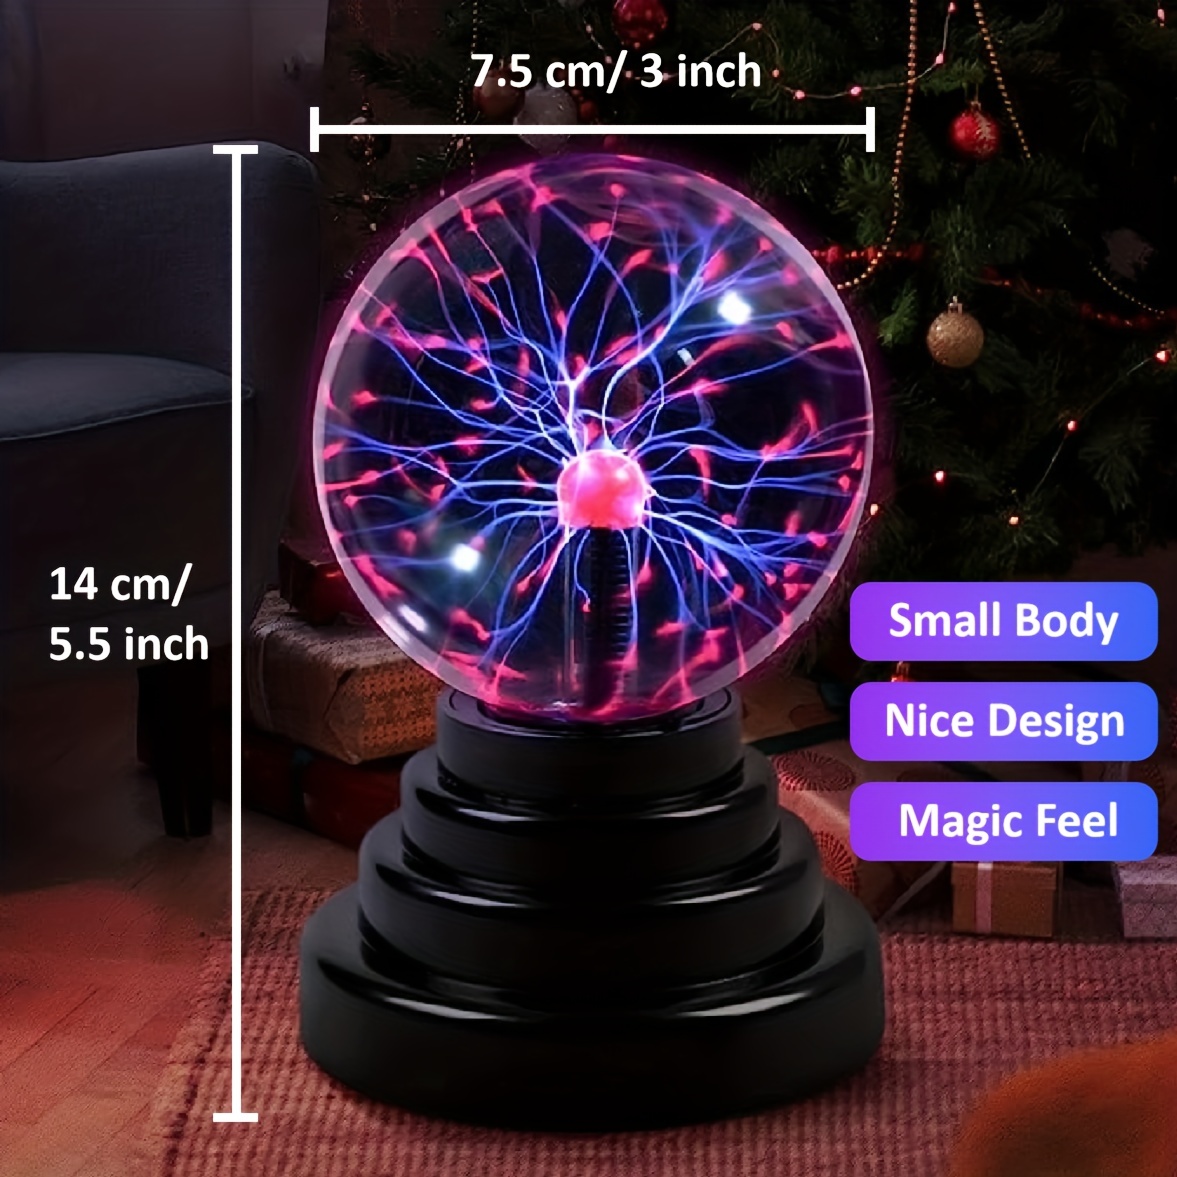 plasma ball light lamp touch sensitive usb powered magic static electricity for parties home decorations birthday gifts science teaching